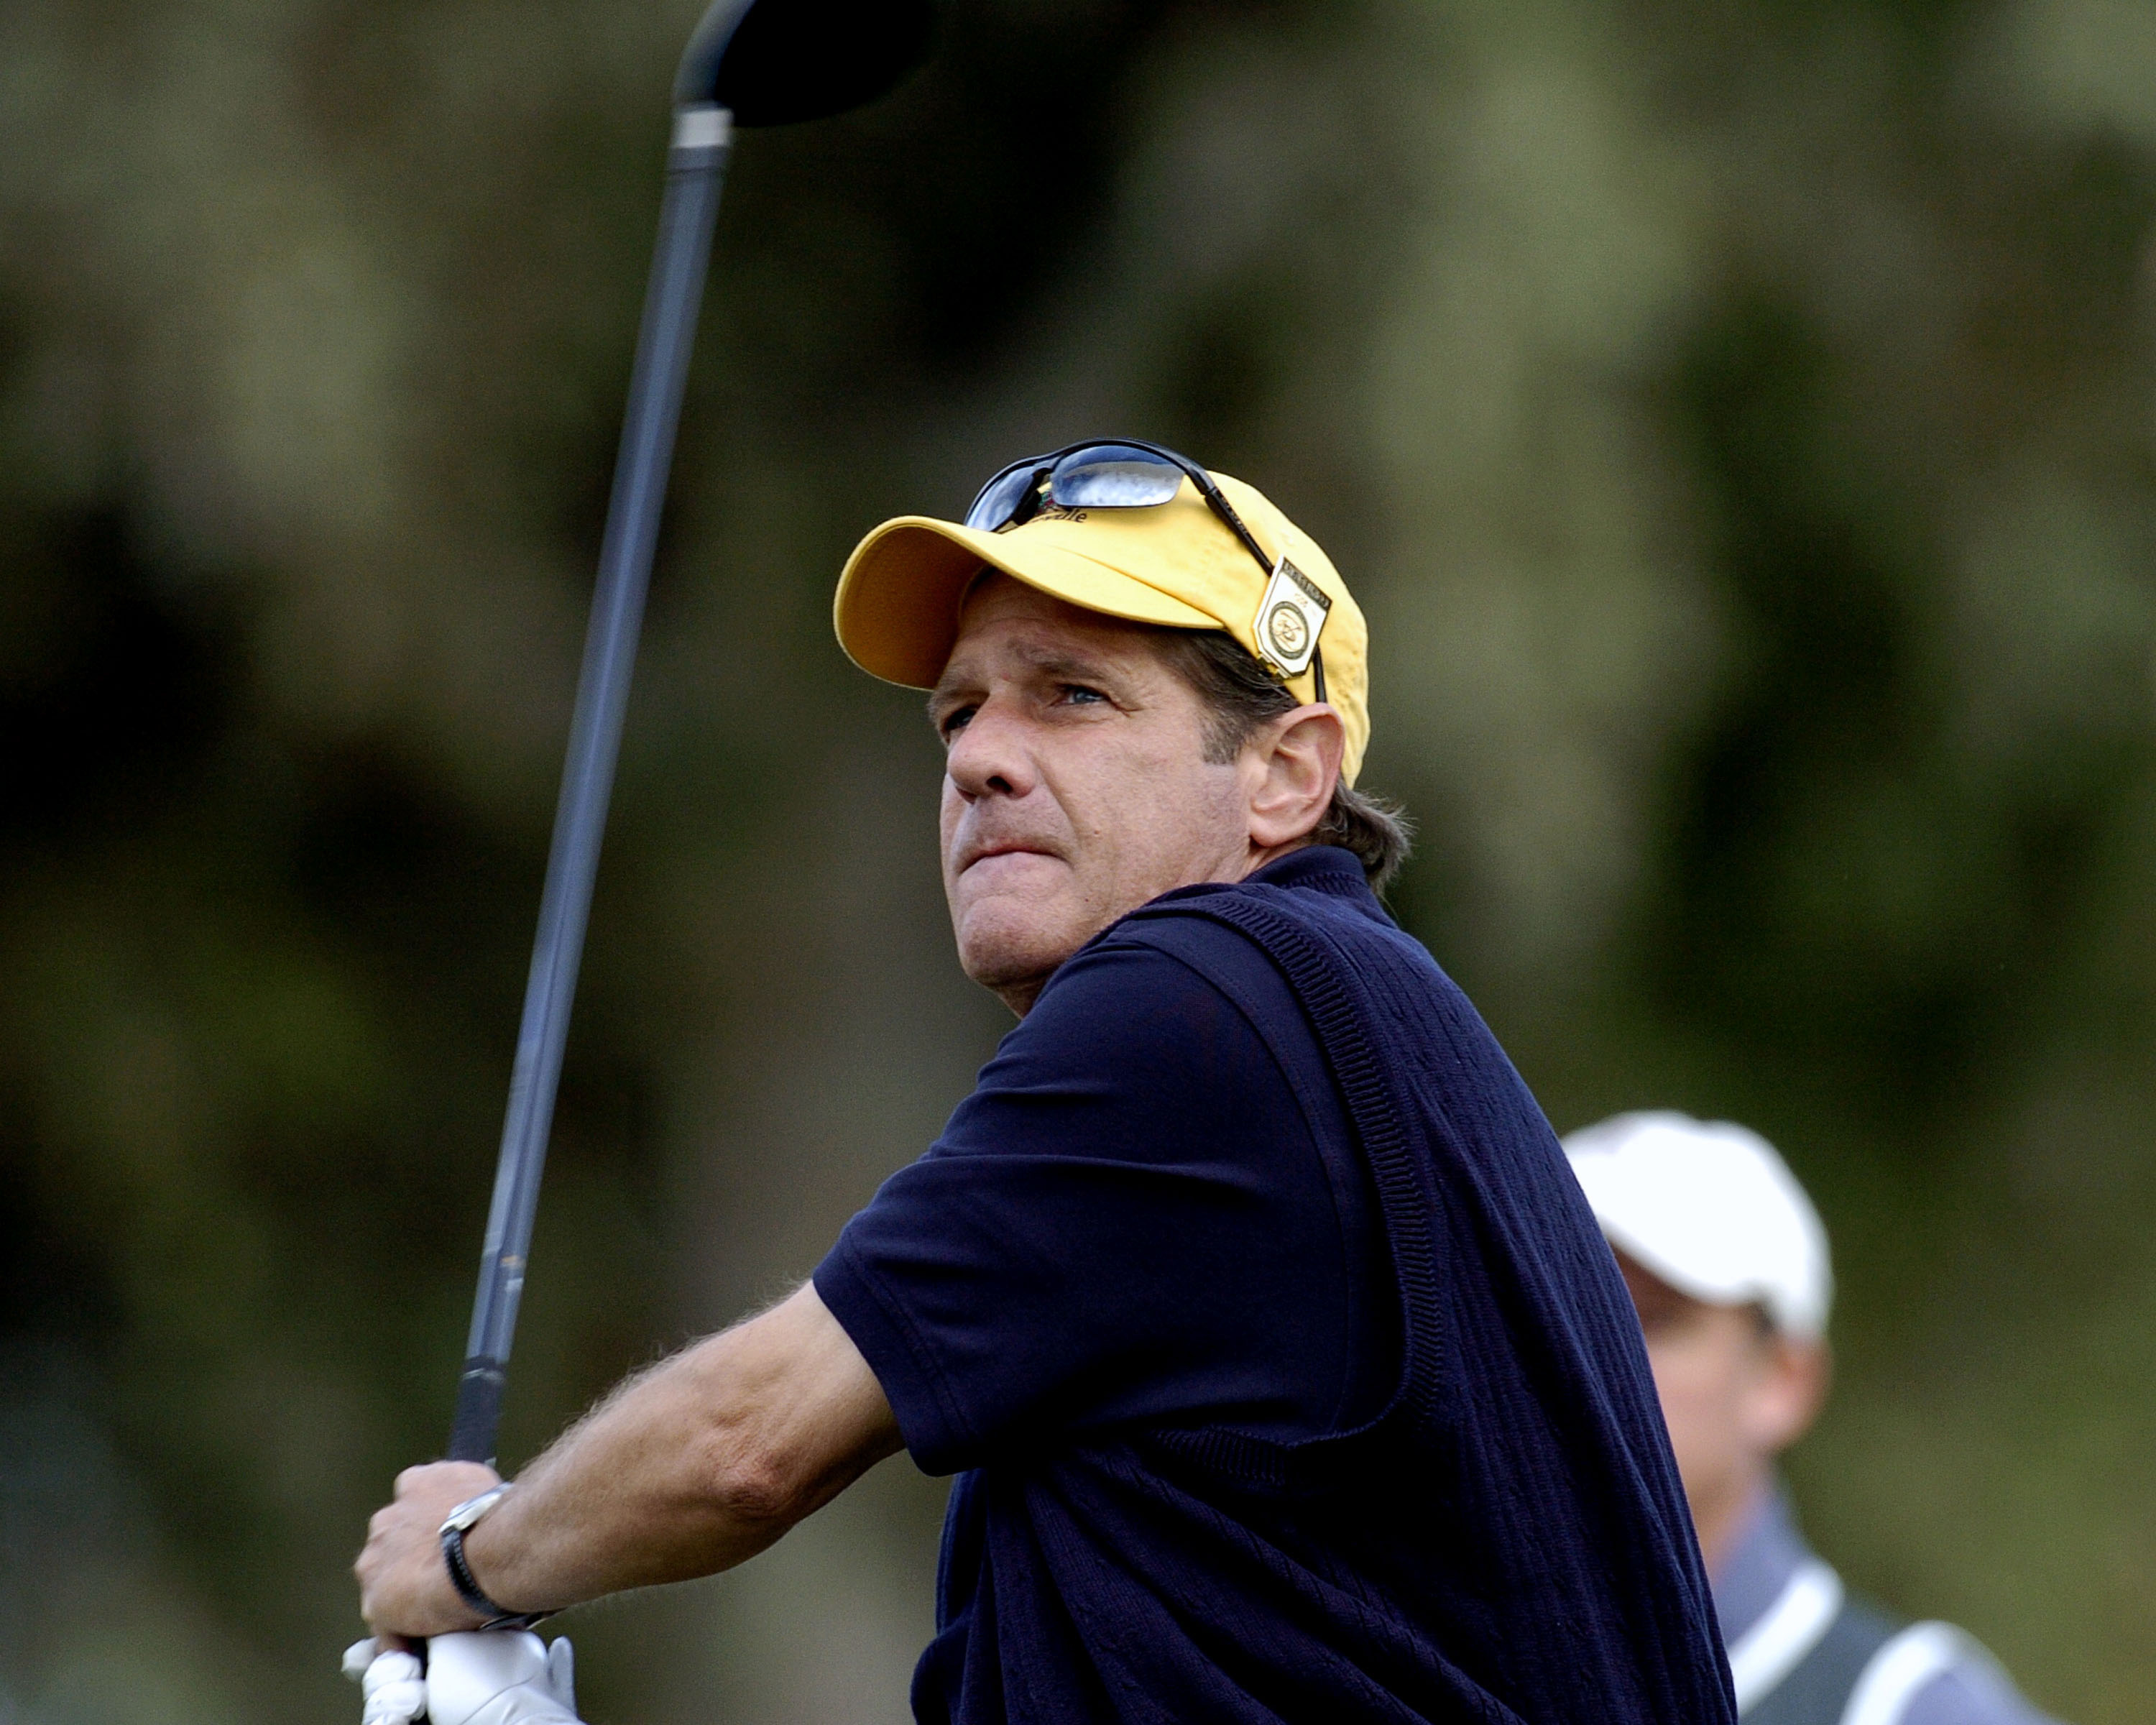 Music was Glenn Frey's profession, but golf was his passion